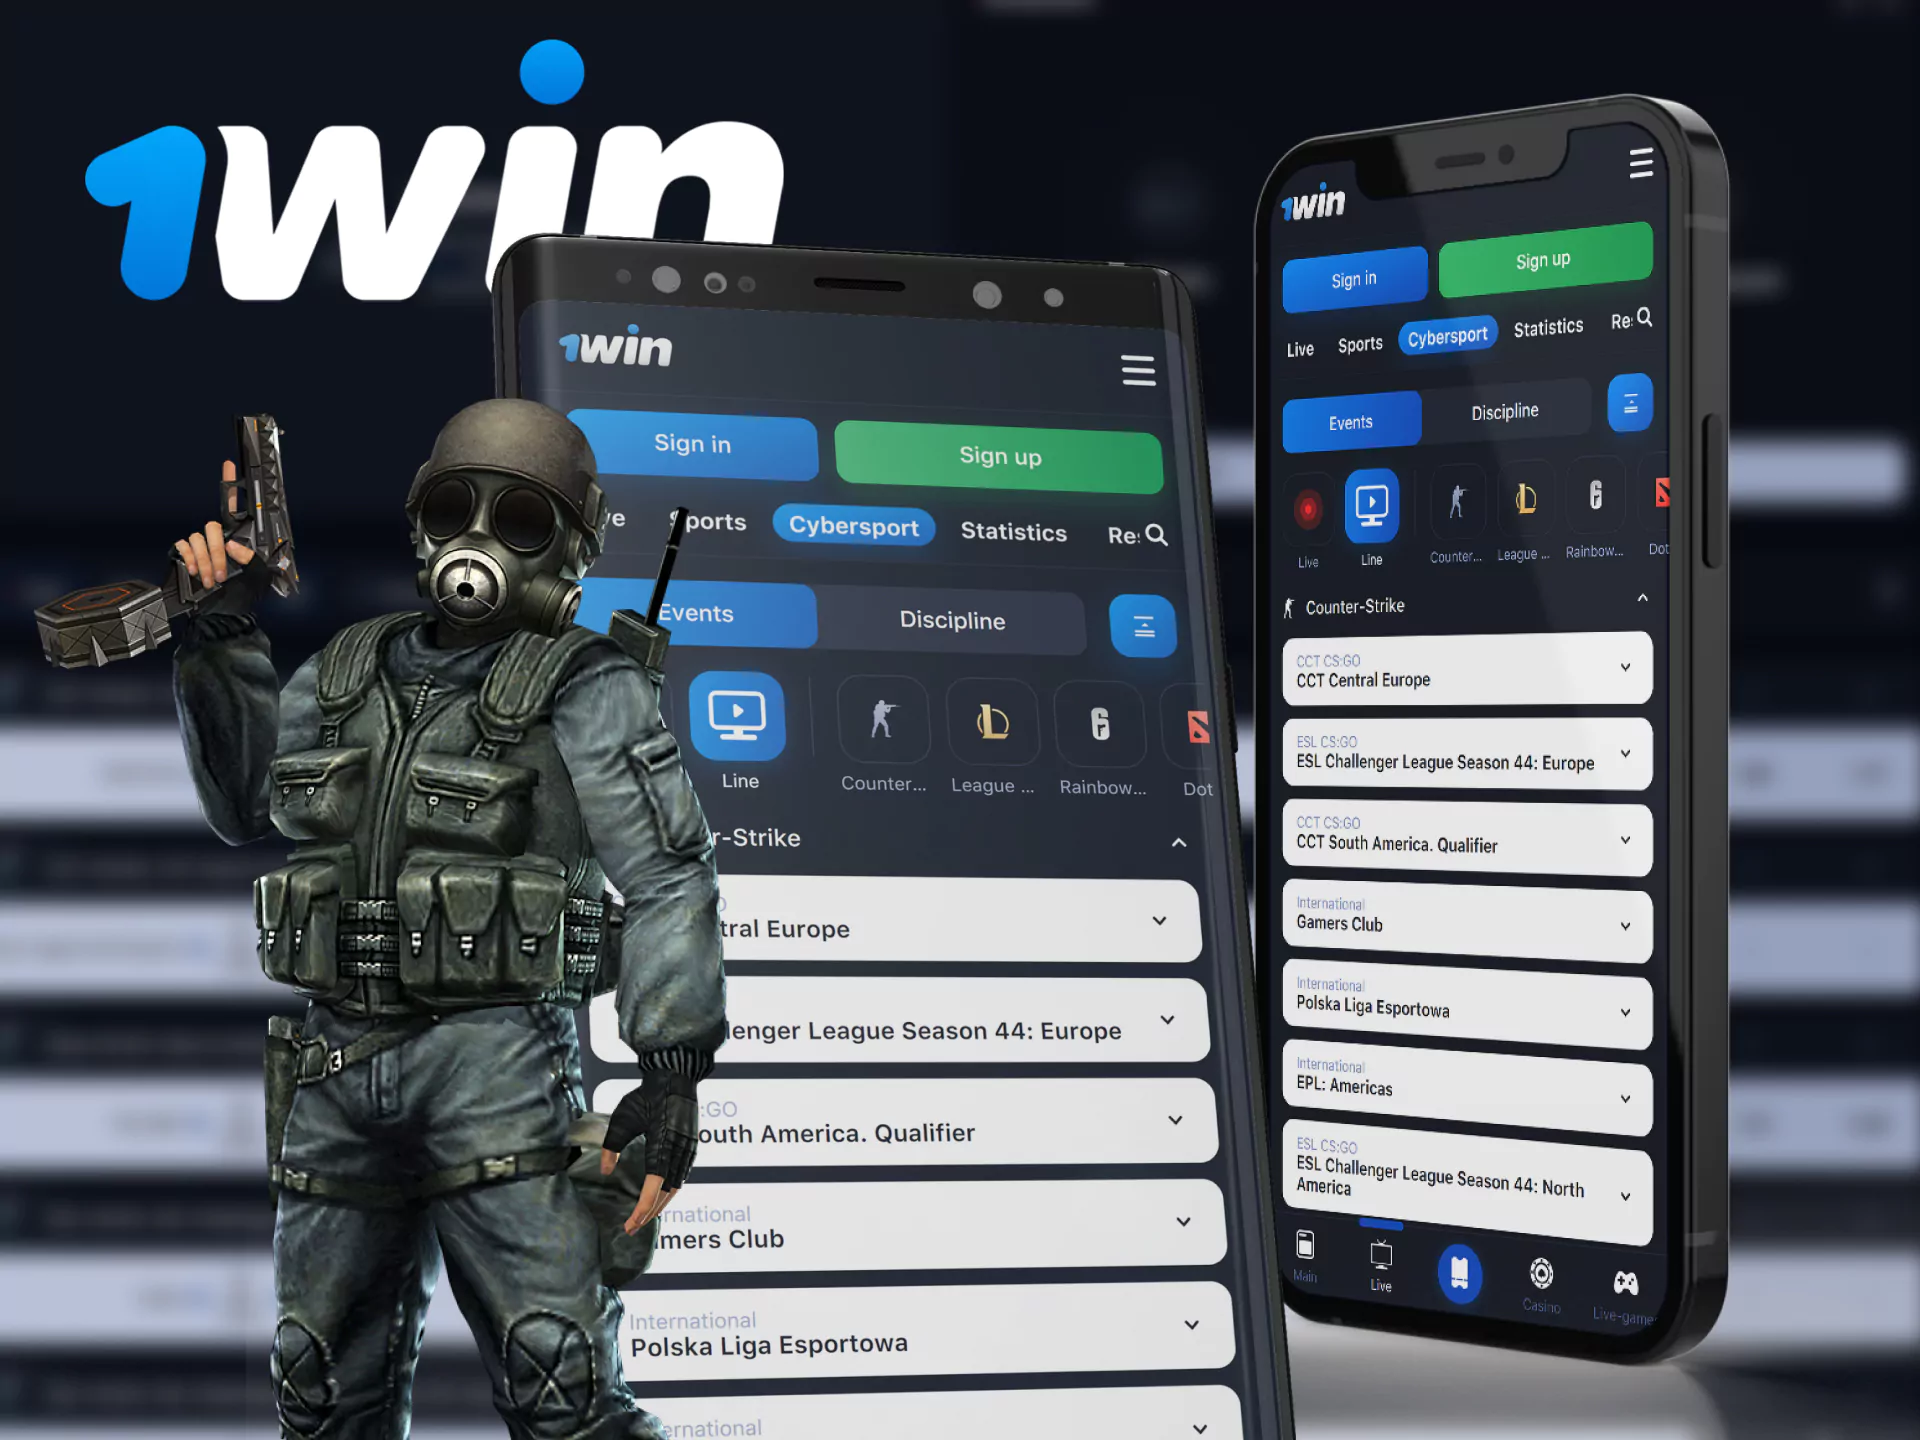 At 1Win, bet from your phone on CS:GO through the app.